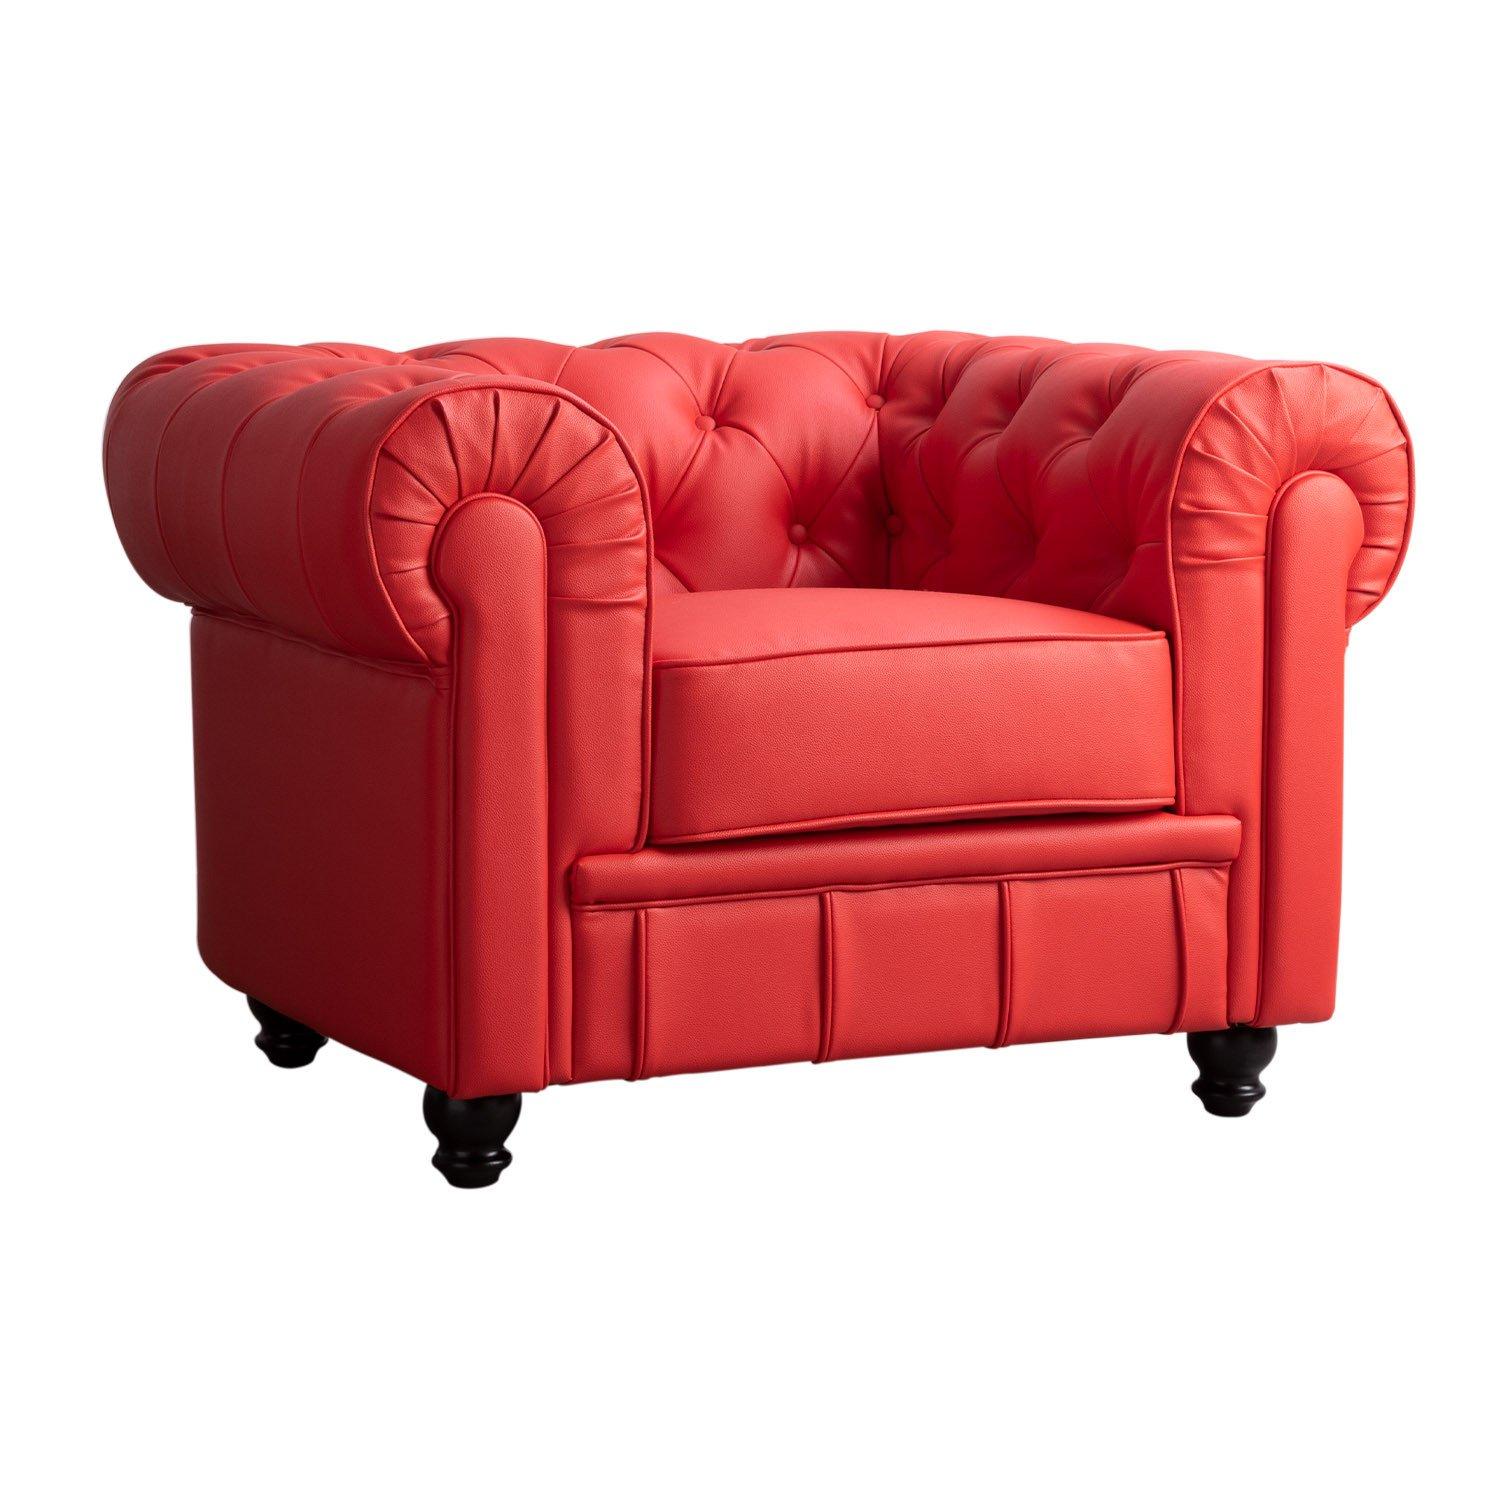 Fauteuil chester moderne rouge